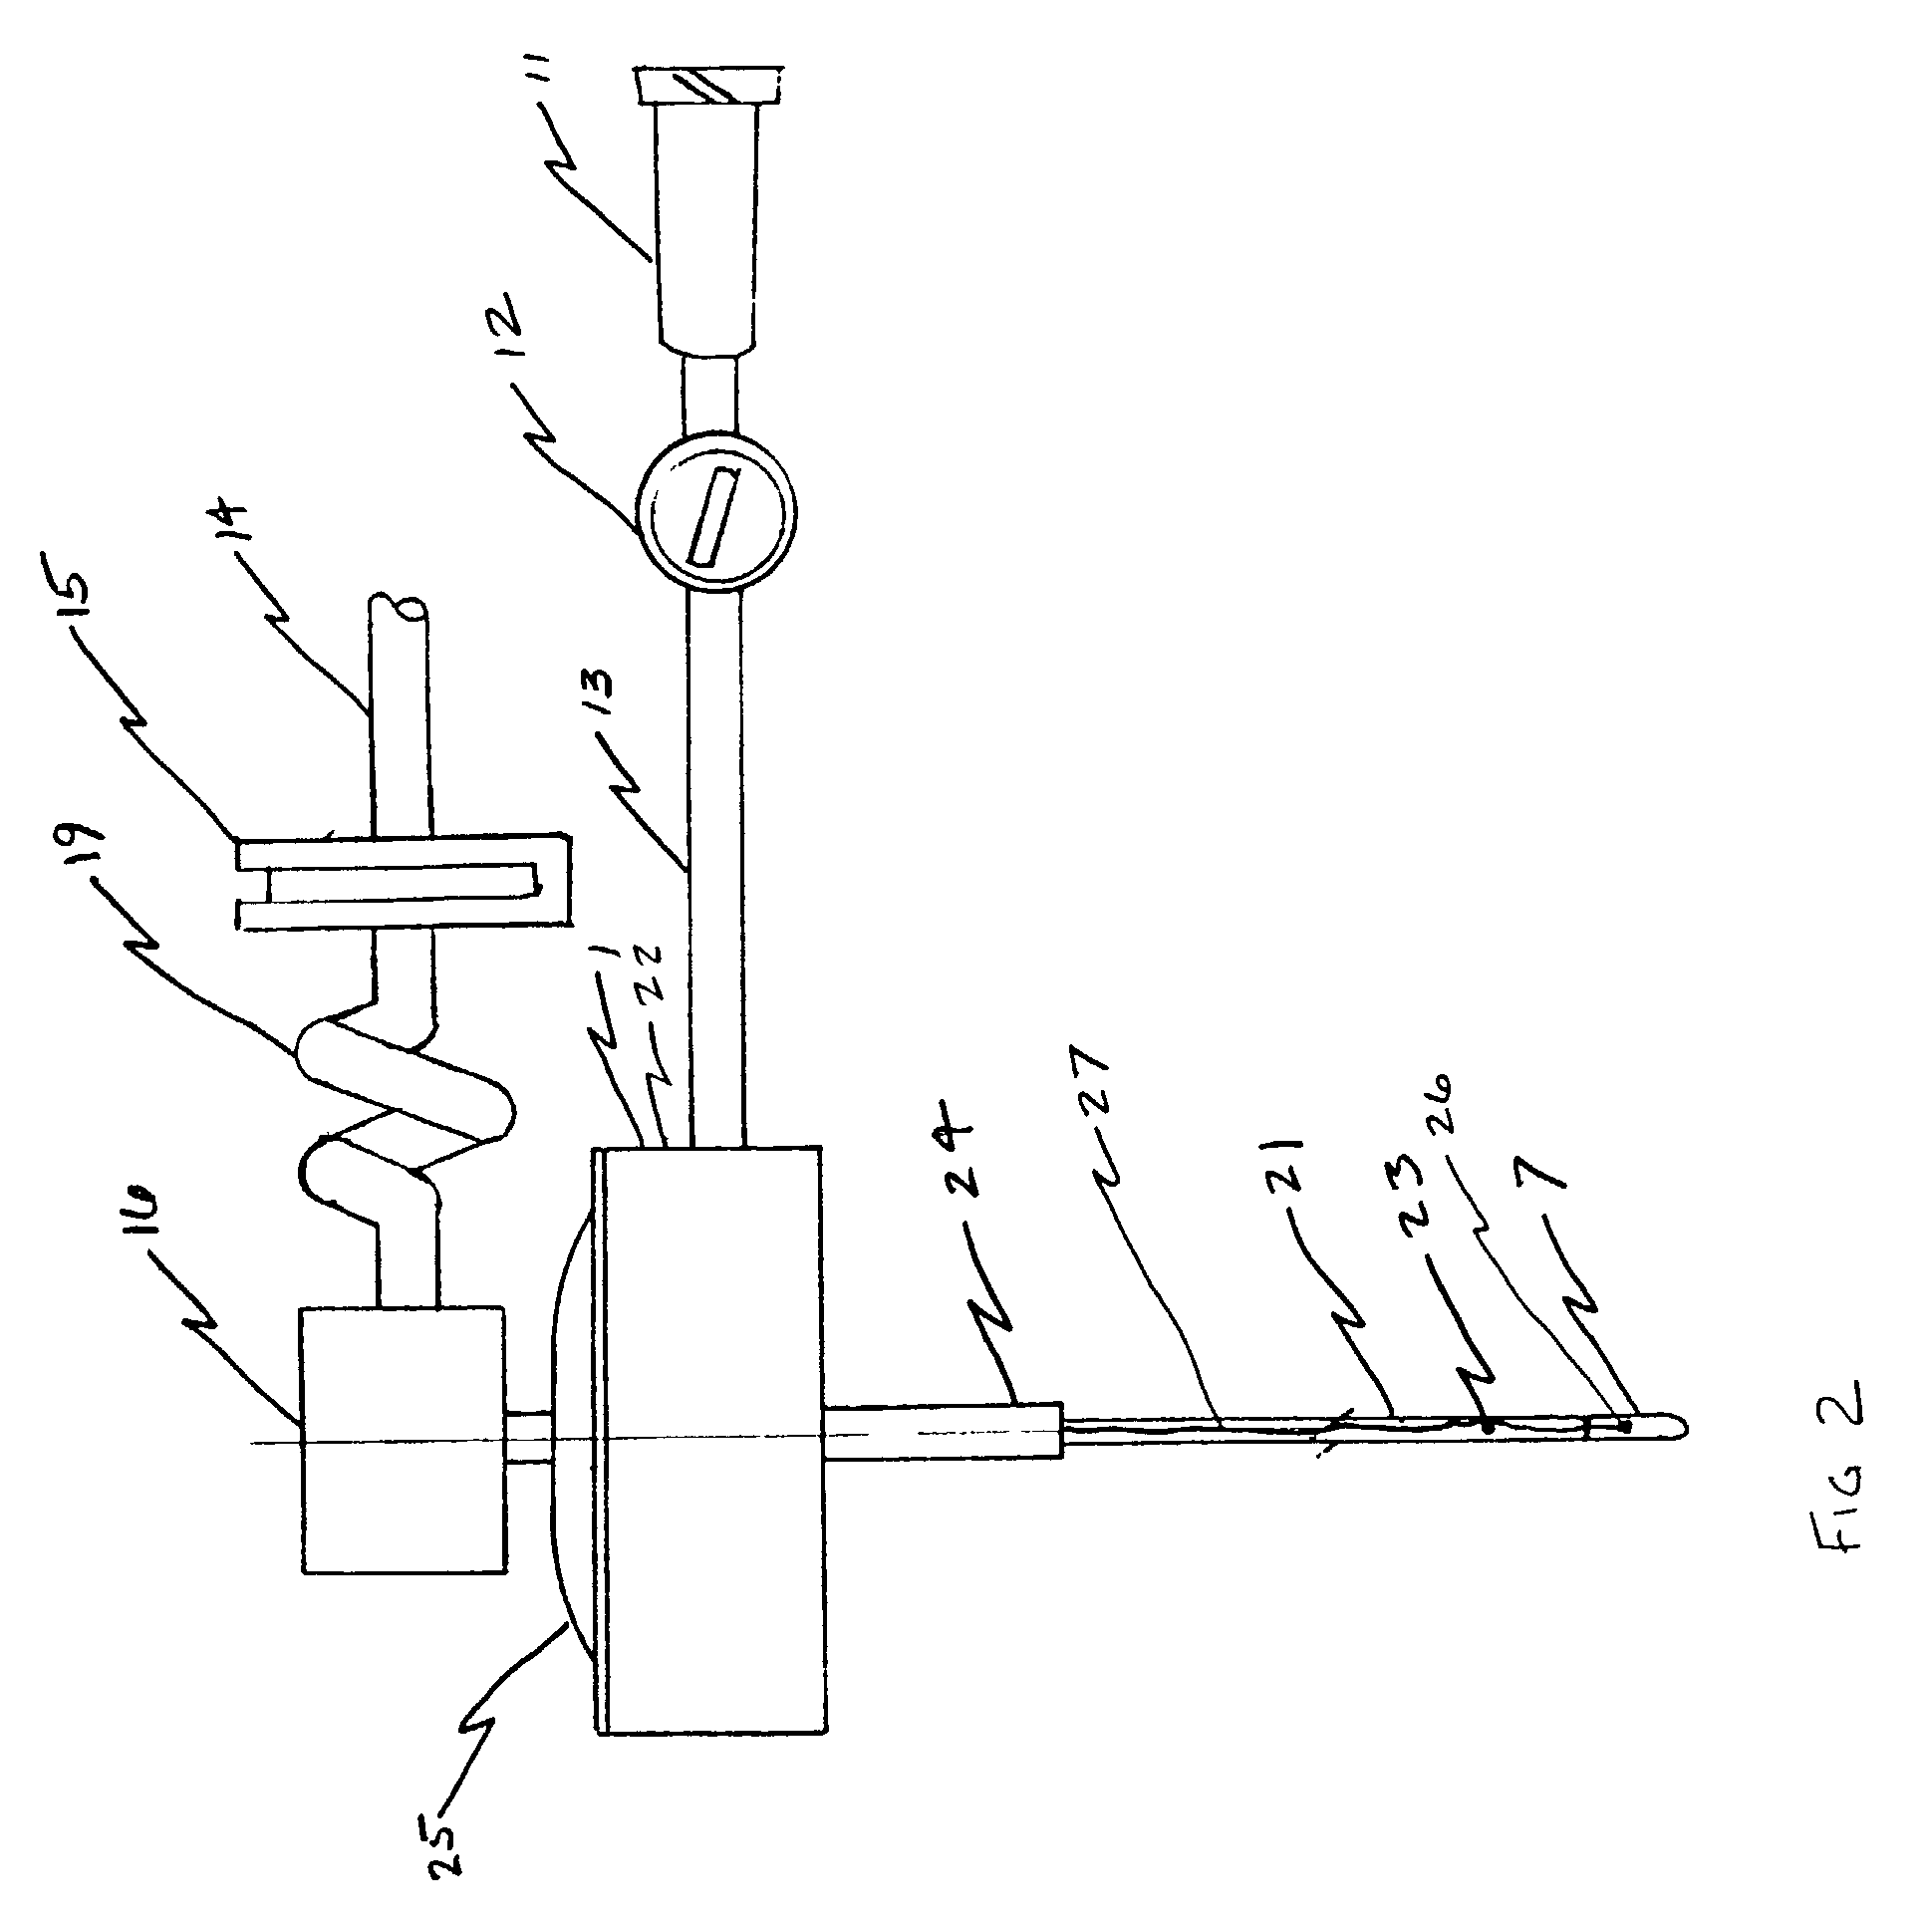 Interstitial brain cooling probe and sheath apparatus